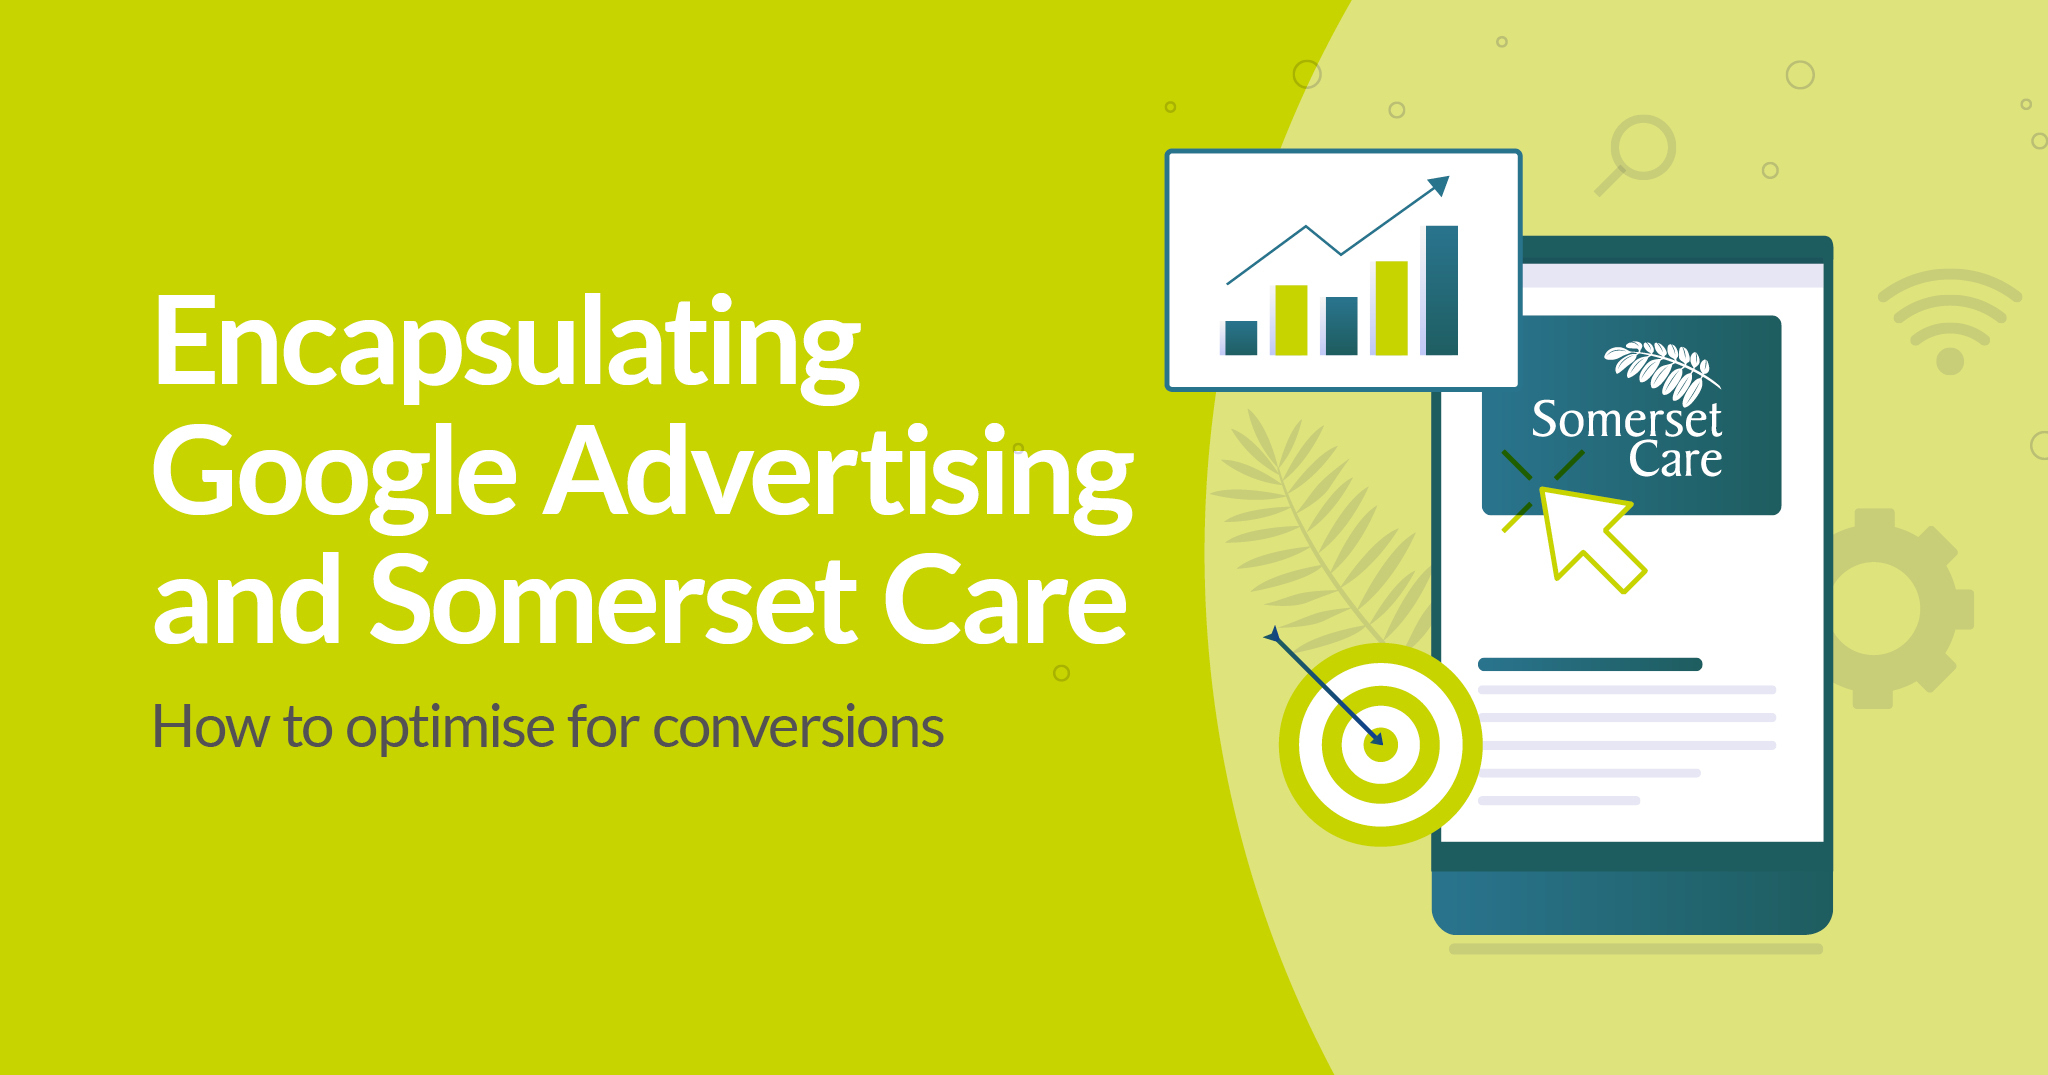 Google Advertising and Somerset Care – how to optimise for conversions effectively